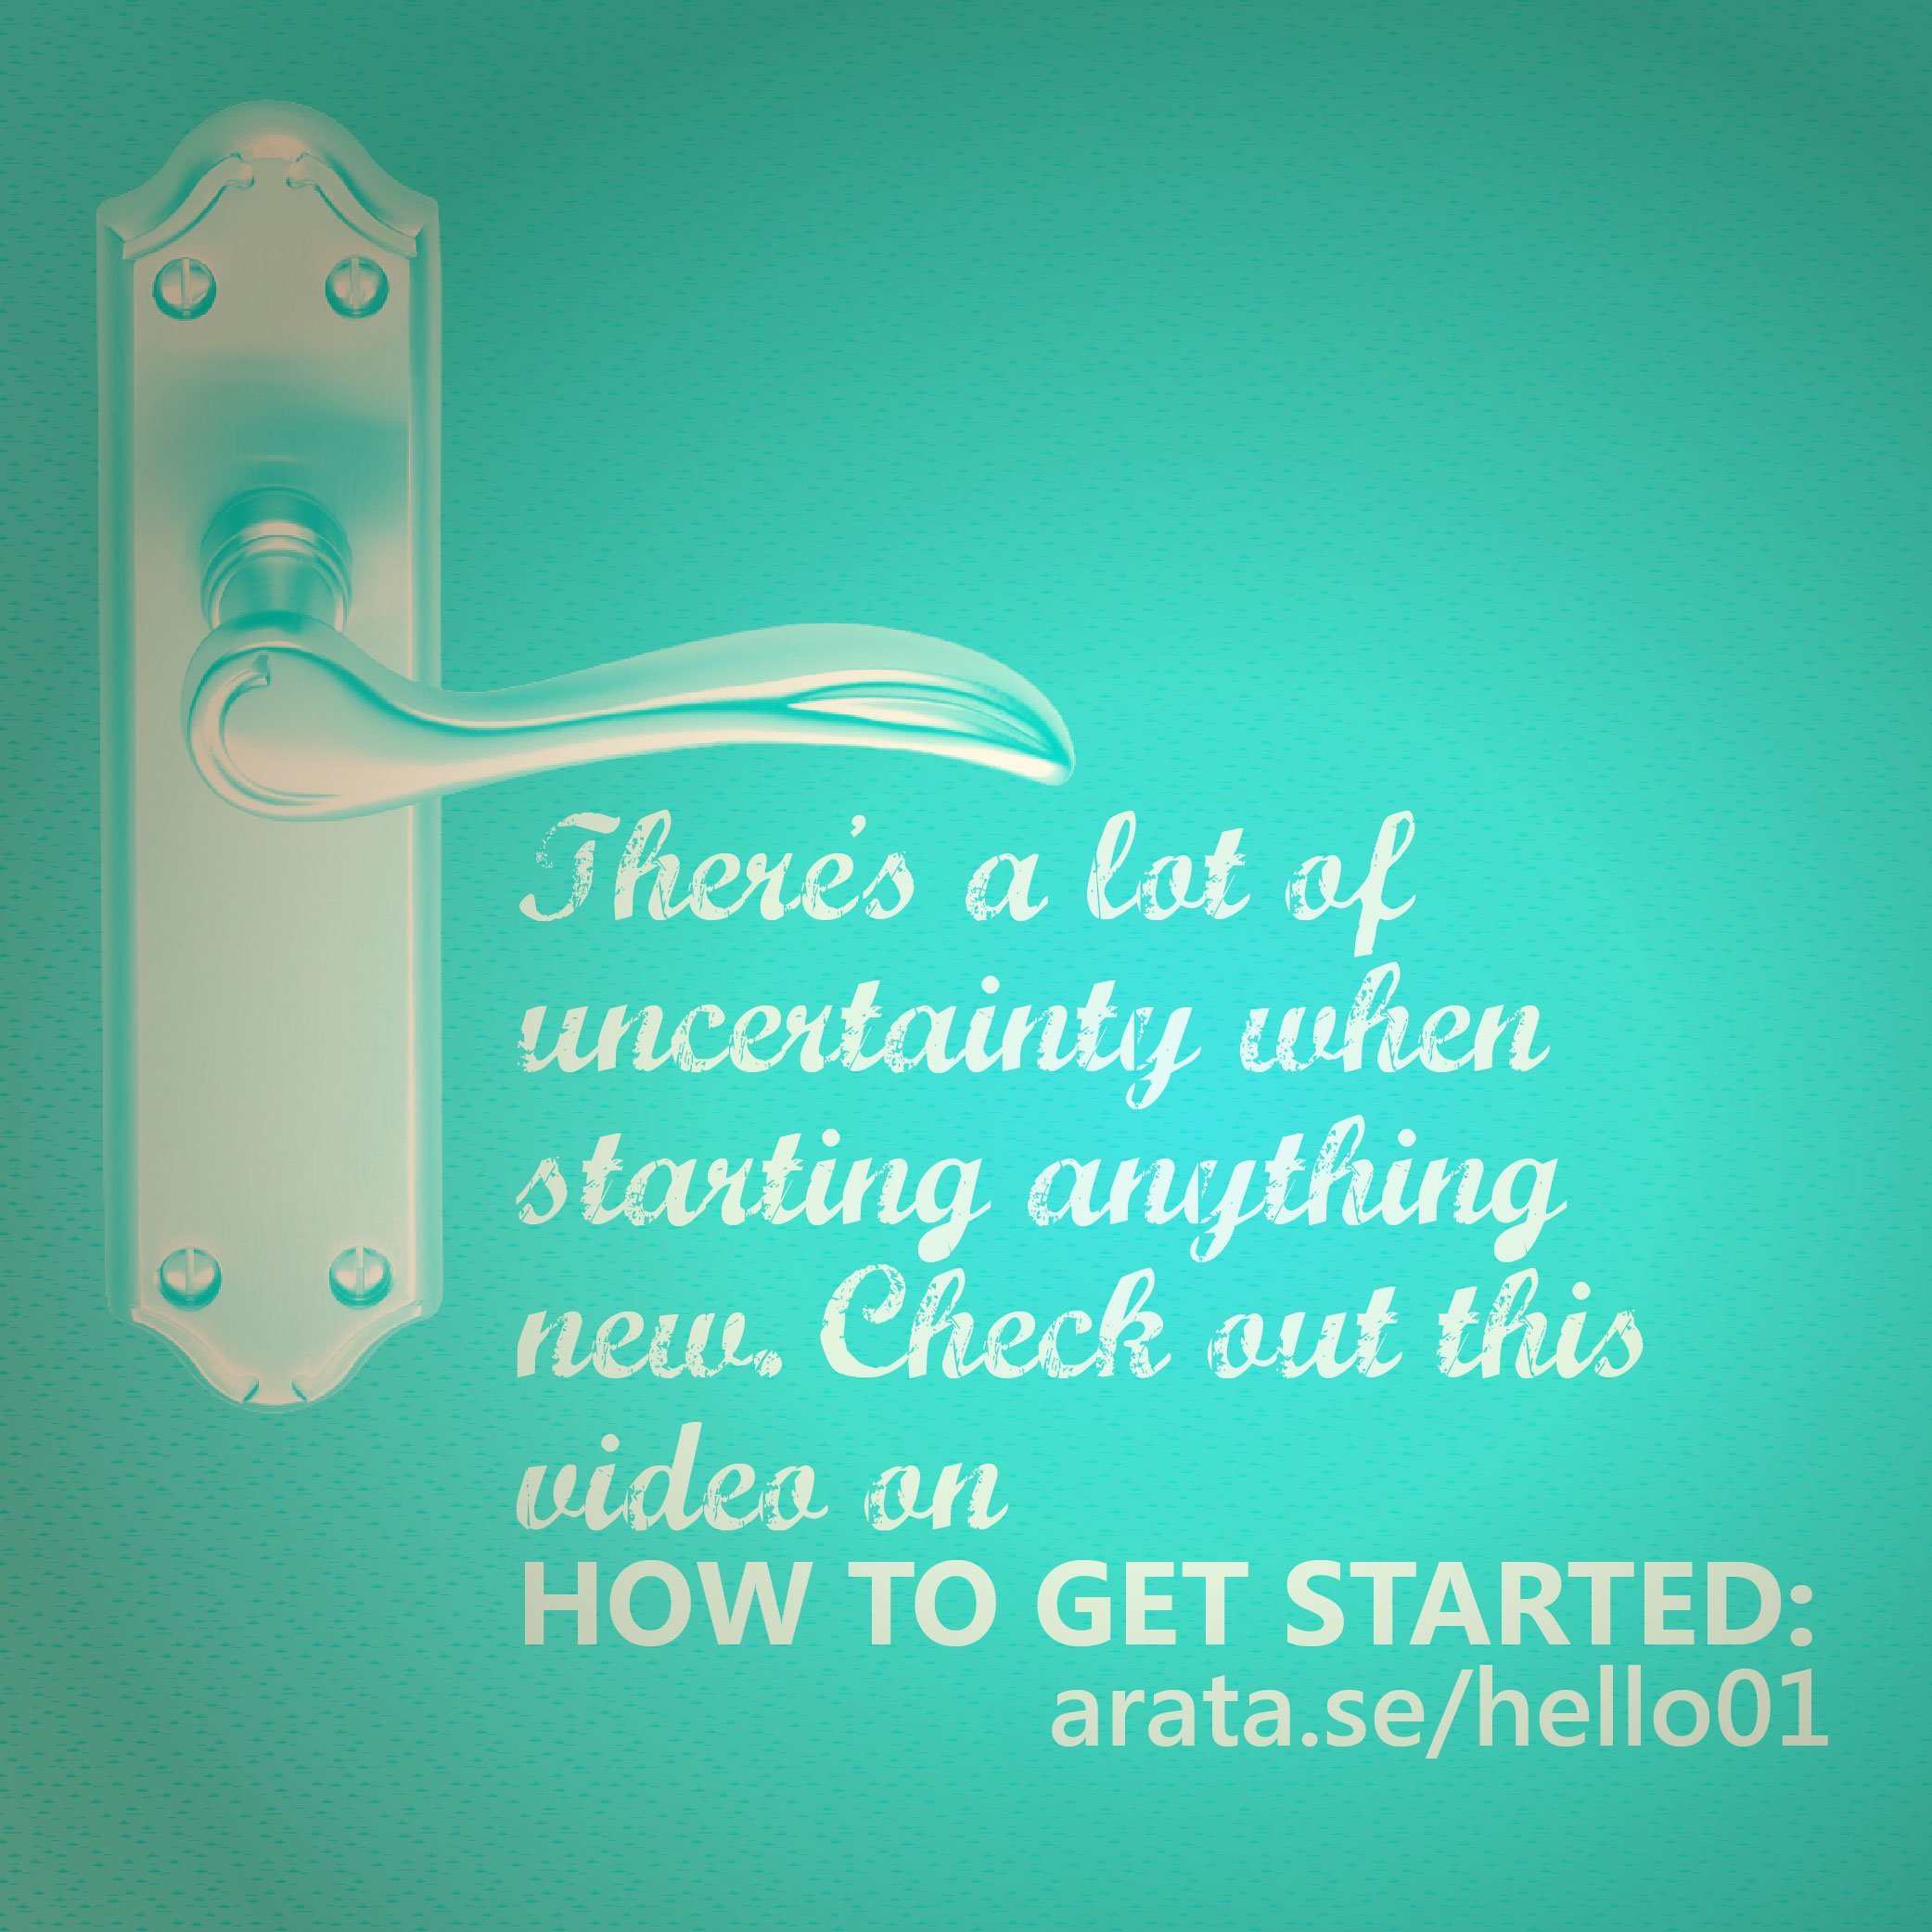 There’s a lot of uncertainty when starting anything new.